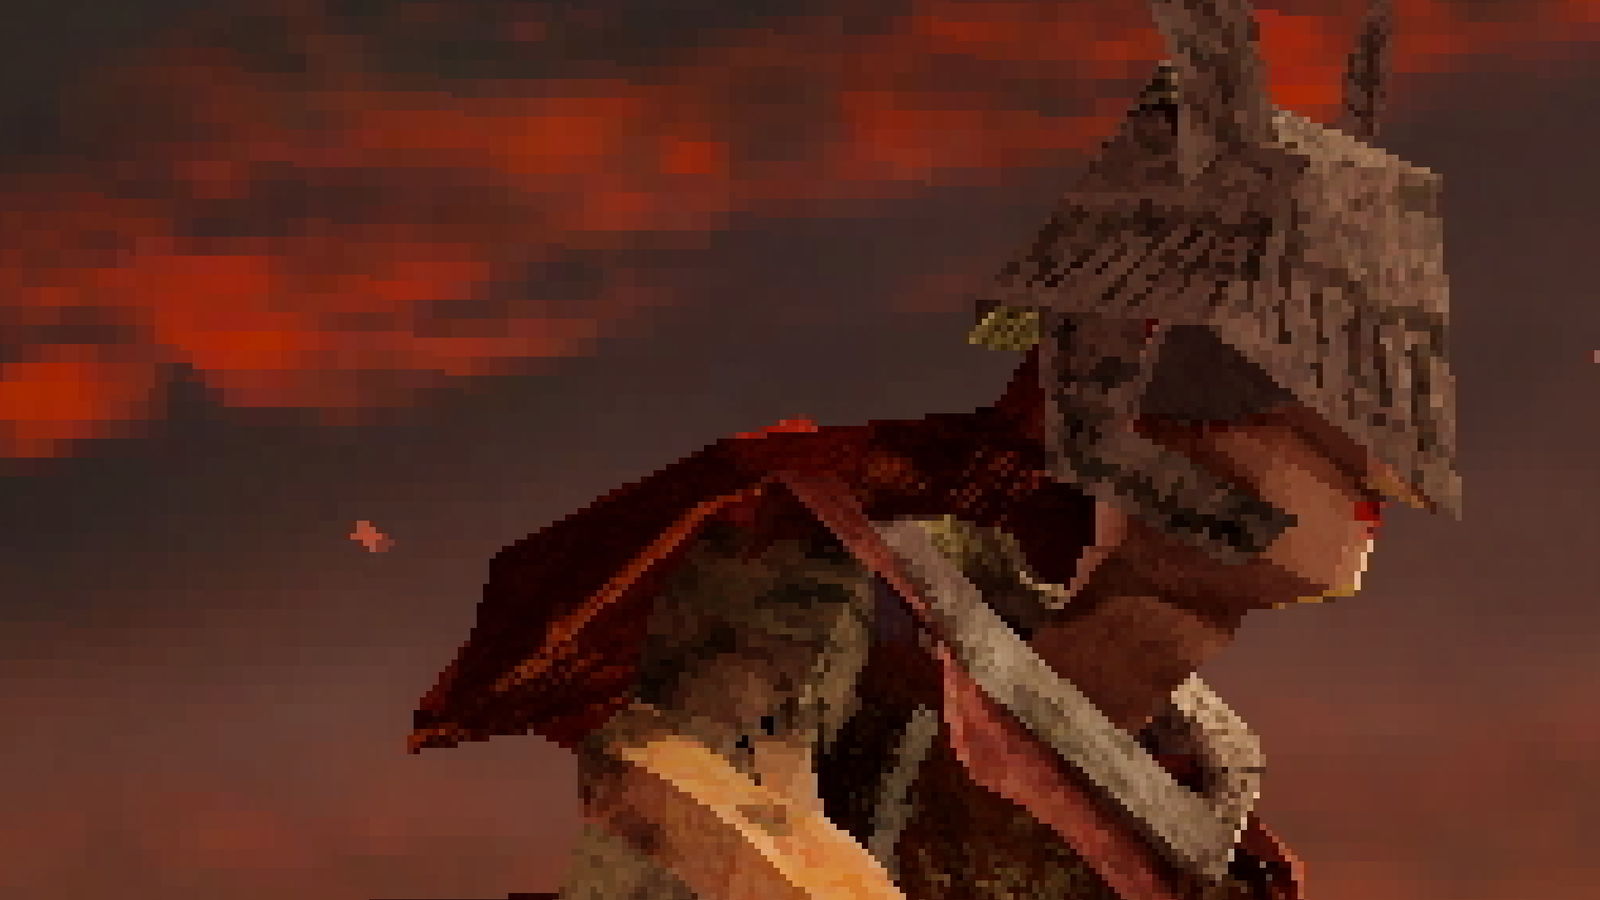 Bloodborne' PC demake reimagines the game as a PS1 title